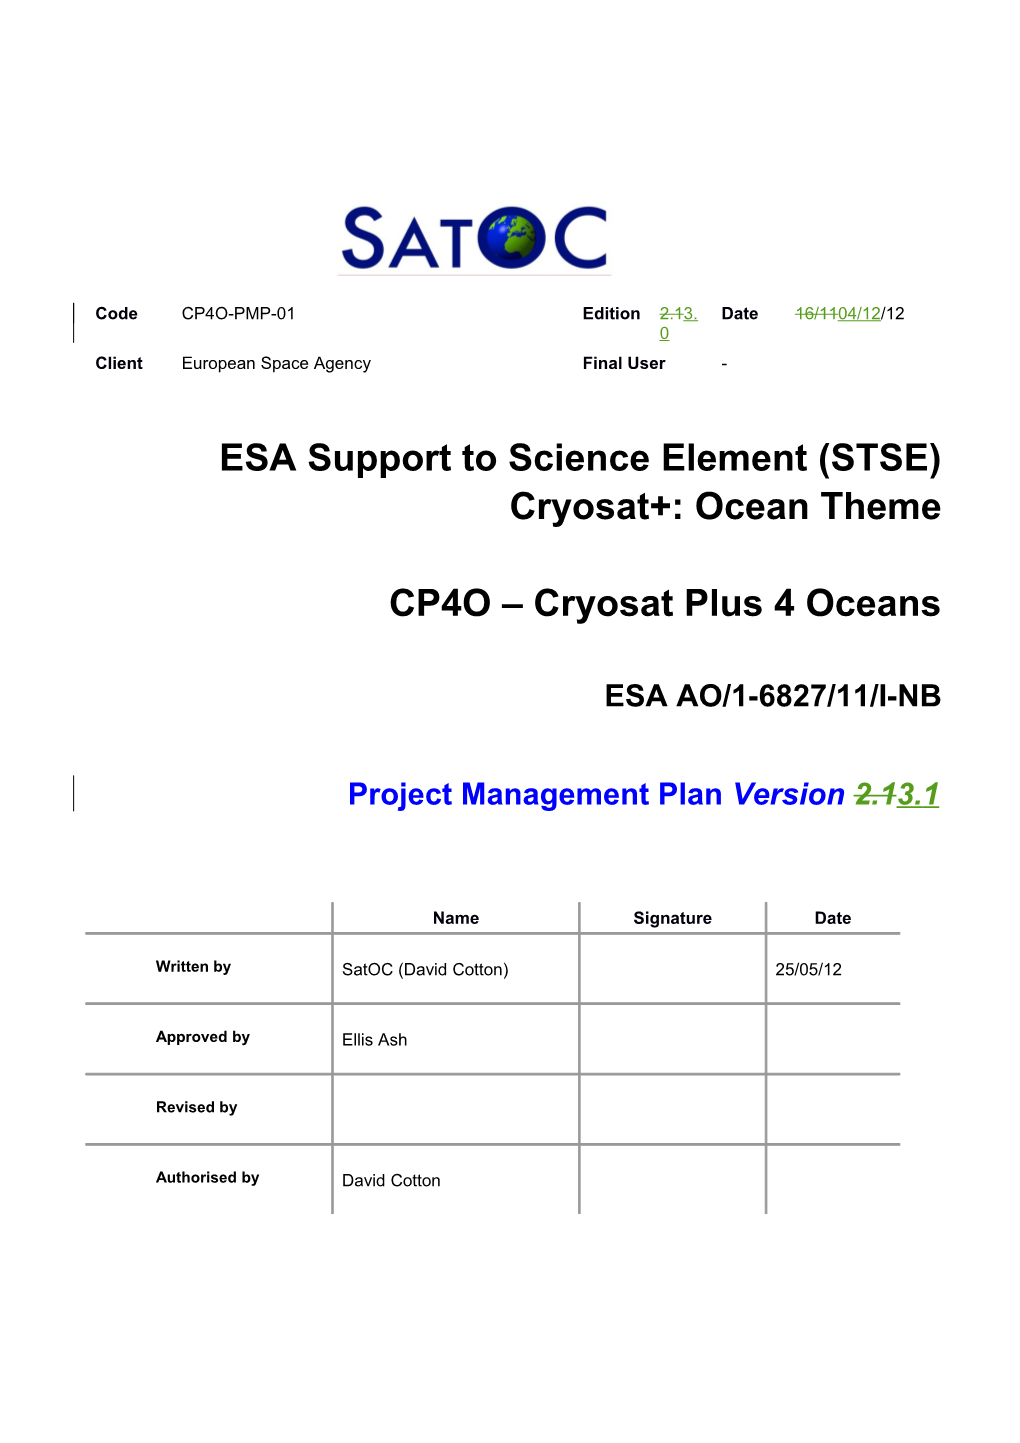 ESA Support to Science Element (STSE)